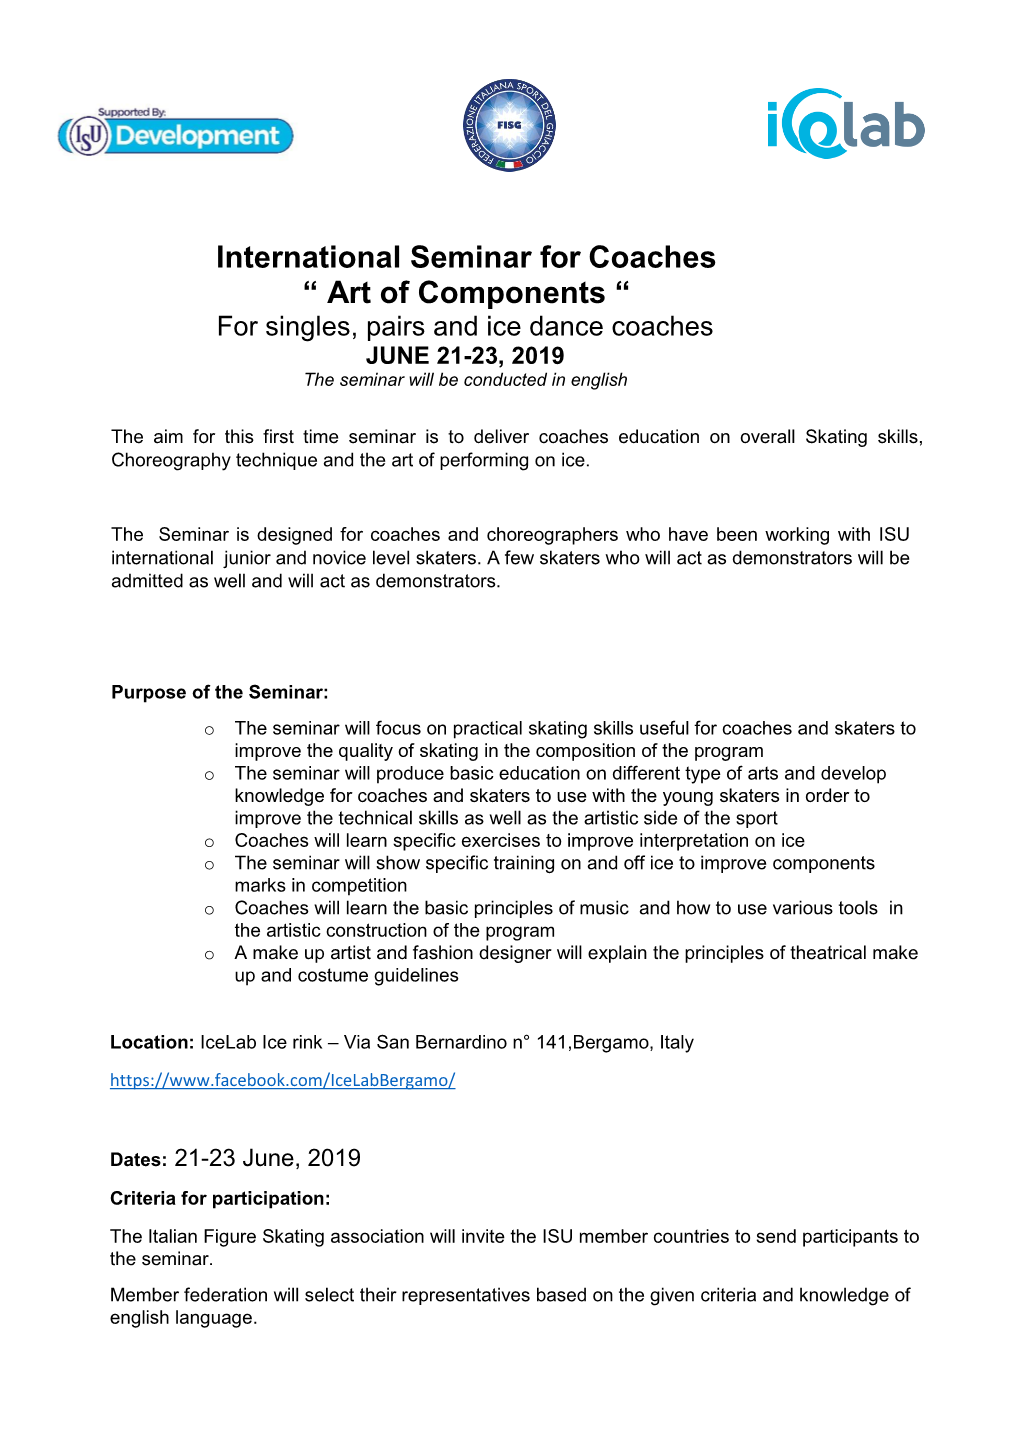 International Seminar for Coaches “ Art of Components “ for Singles, Pairs and Ice Dance Coaches JUNE 21-23, 2019 the Seminar Will Be Conducted in English